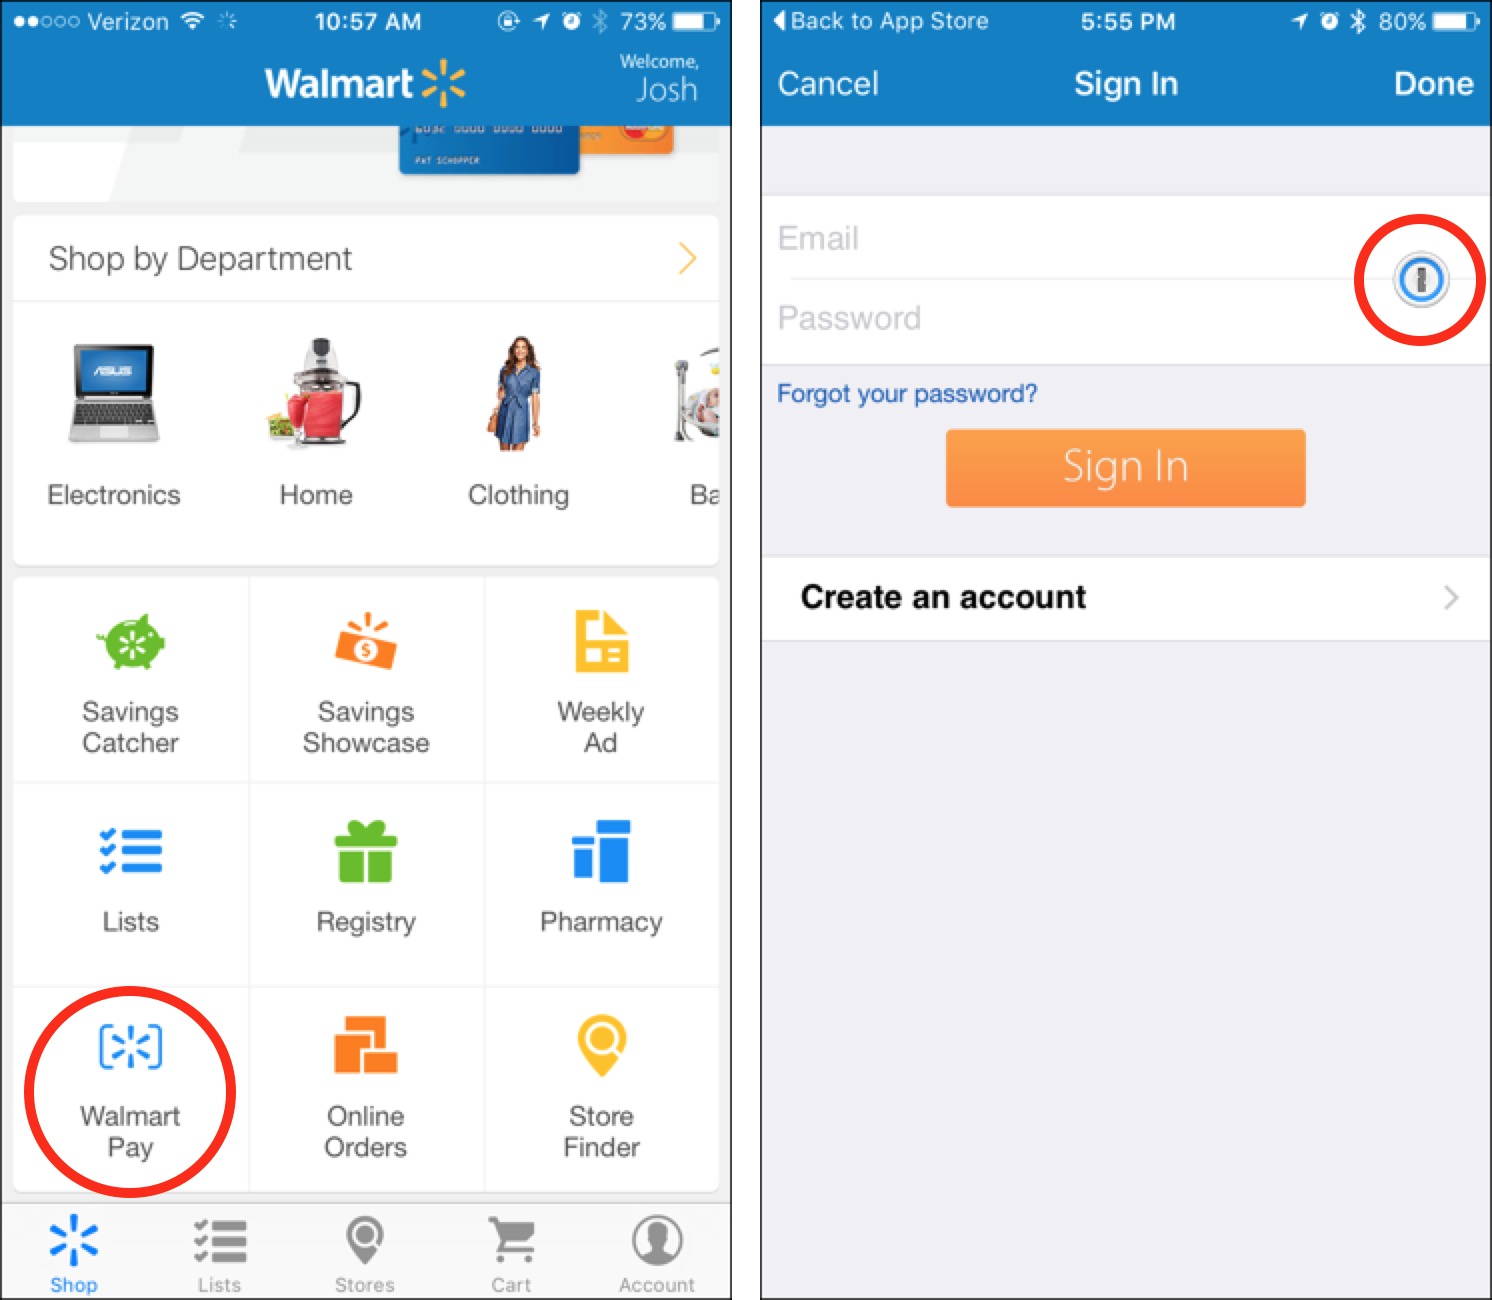 Does Walmart Accept Google Pay & Samsung Pay In 2022?